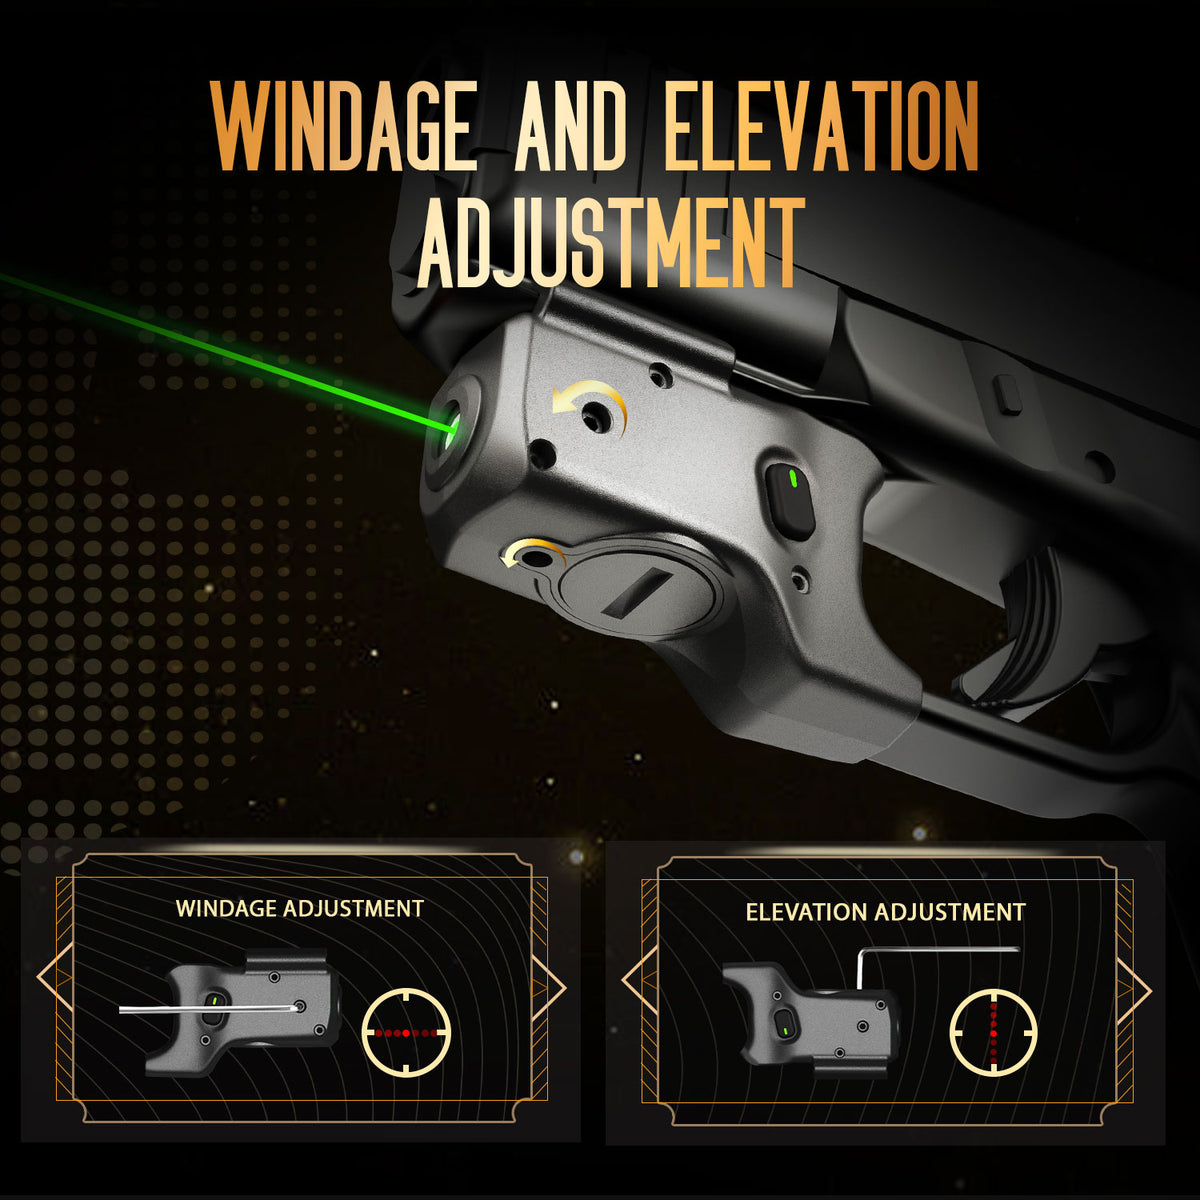 Green Laser Sight Tailored Fit G43X MOS / 48 MOS, Ultra Compact G43X MOS Beam Sight, Gun Sight with Ambidextrous On/Off Switch & Power Indicator, WLS-100G|WARRIORLAND